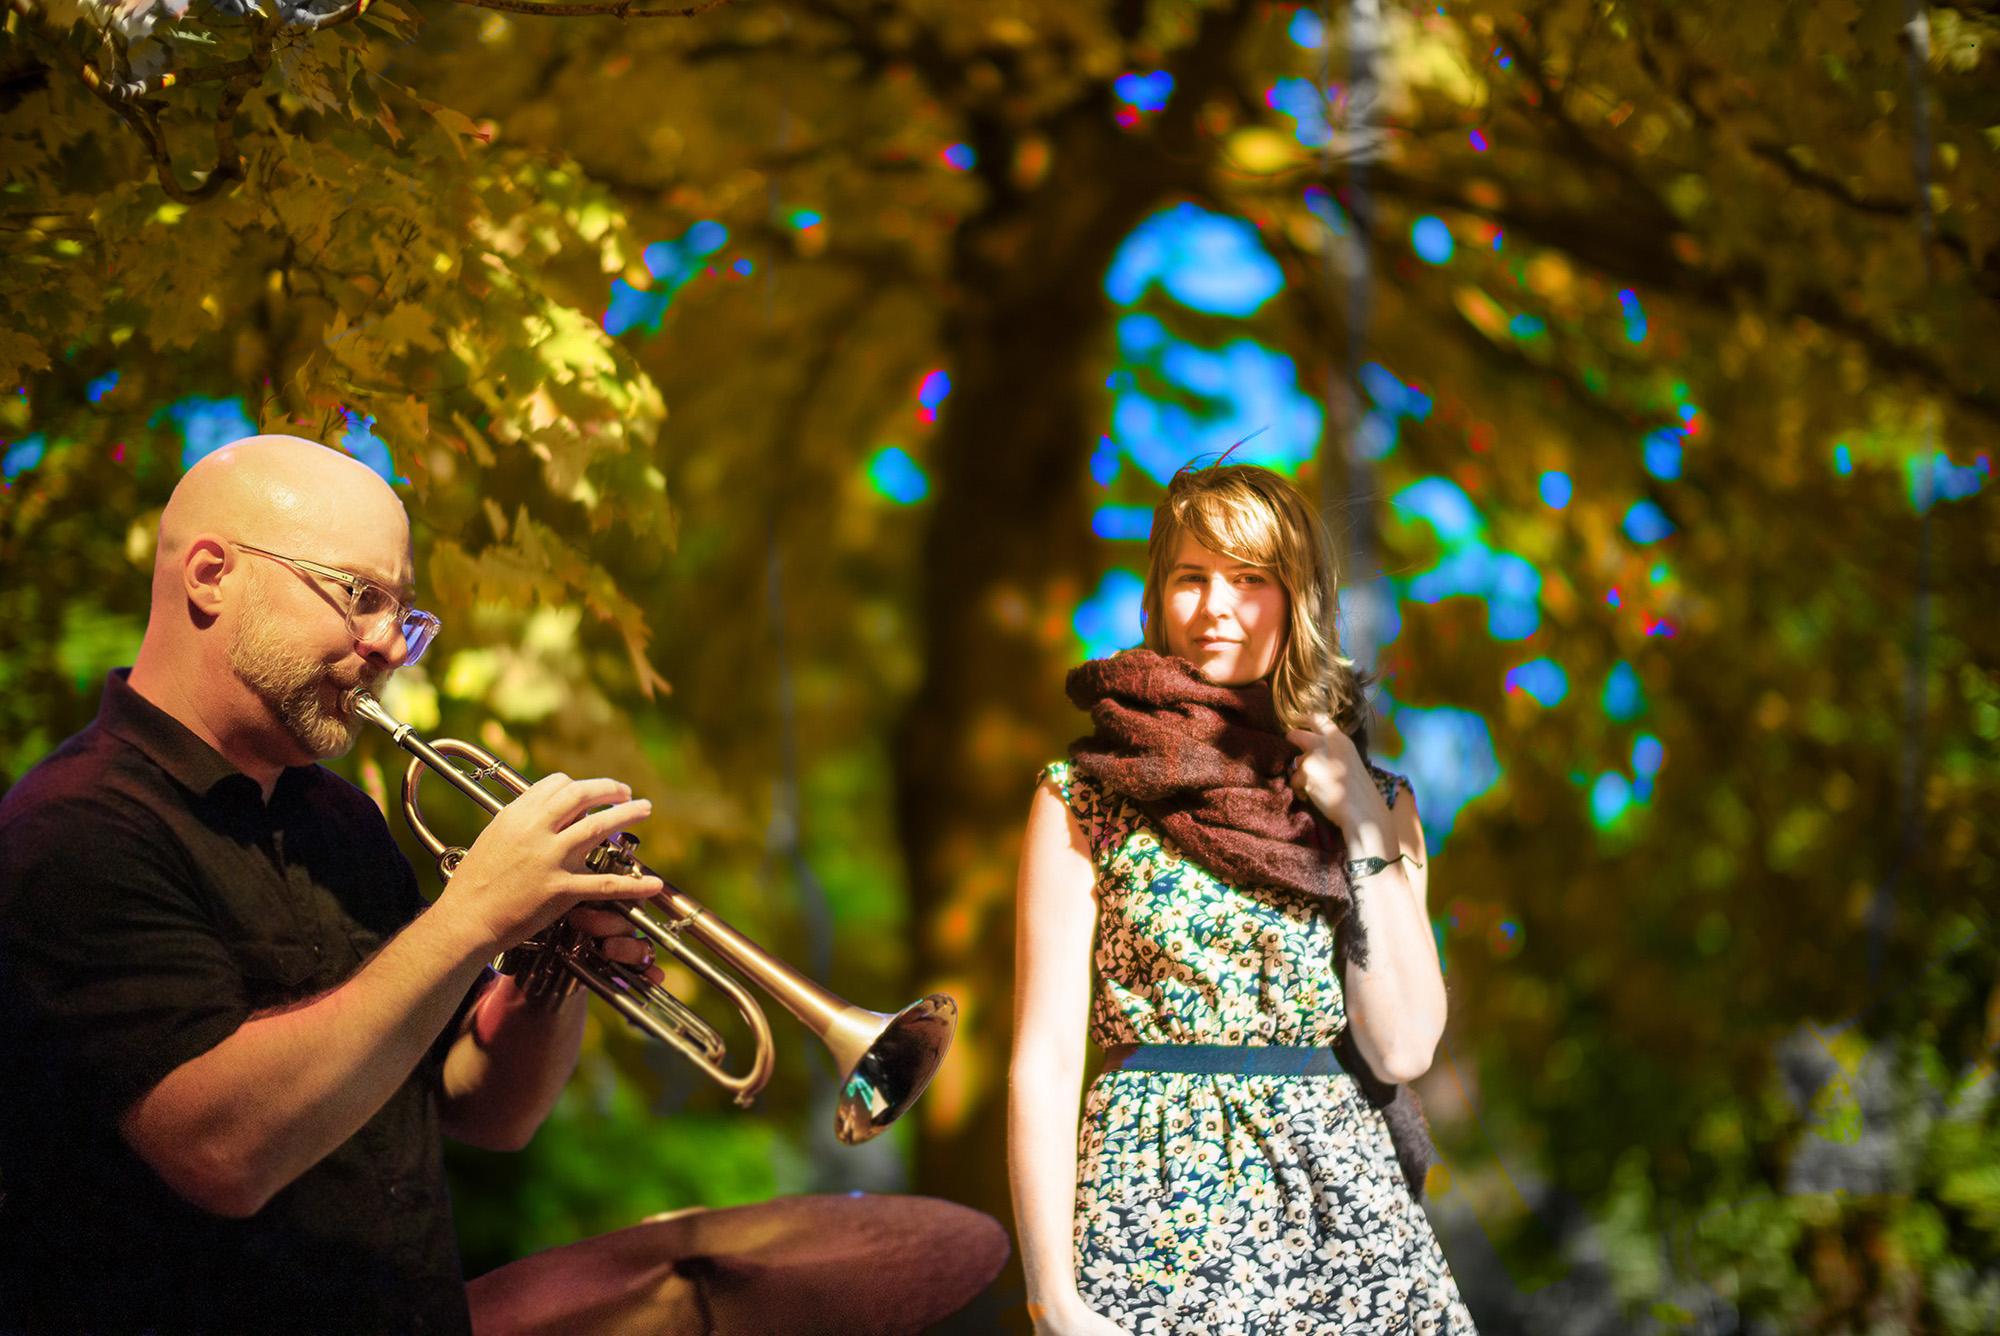 A bald man with glasses plays trumpet under colorful trees while a woman in a floral dress and scarf listens, enjoying the autumn ambiance.